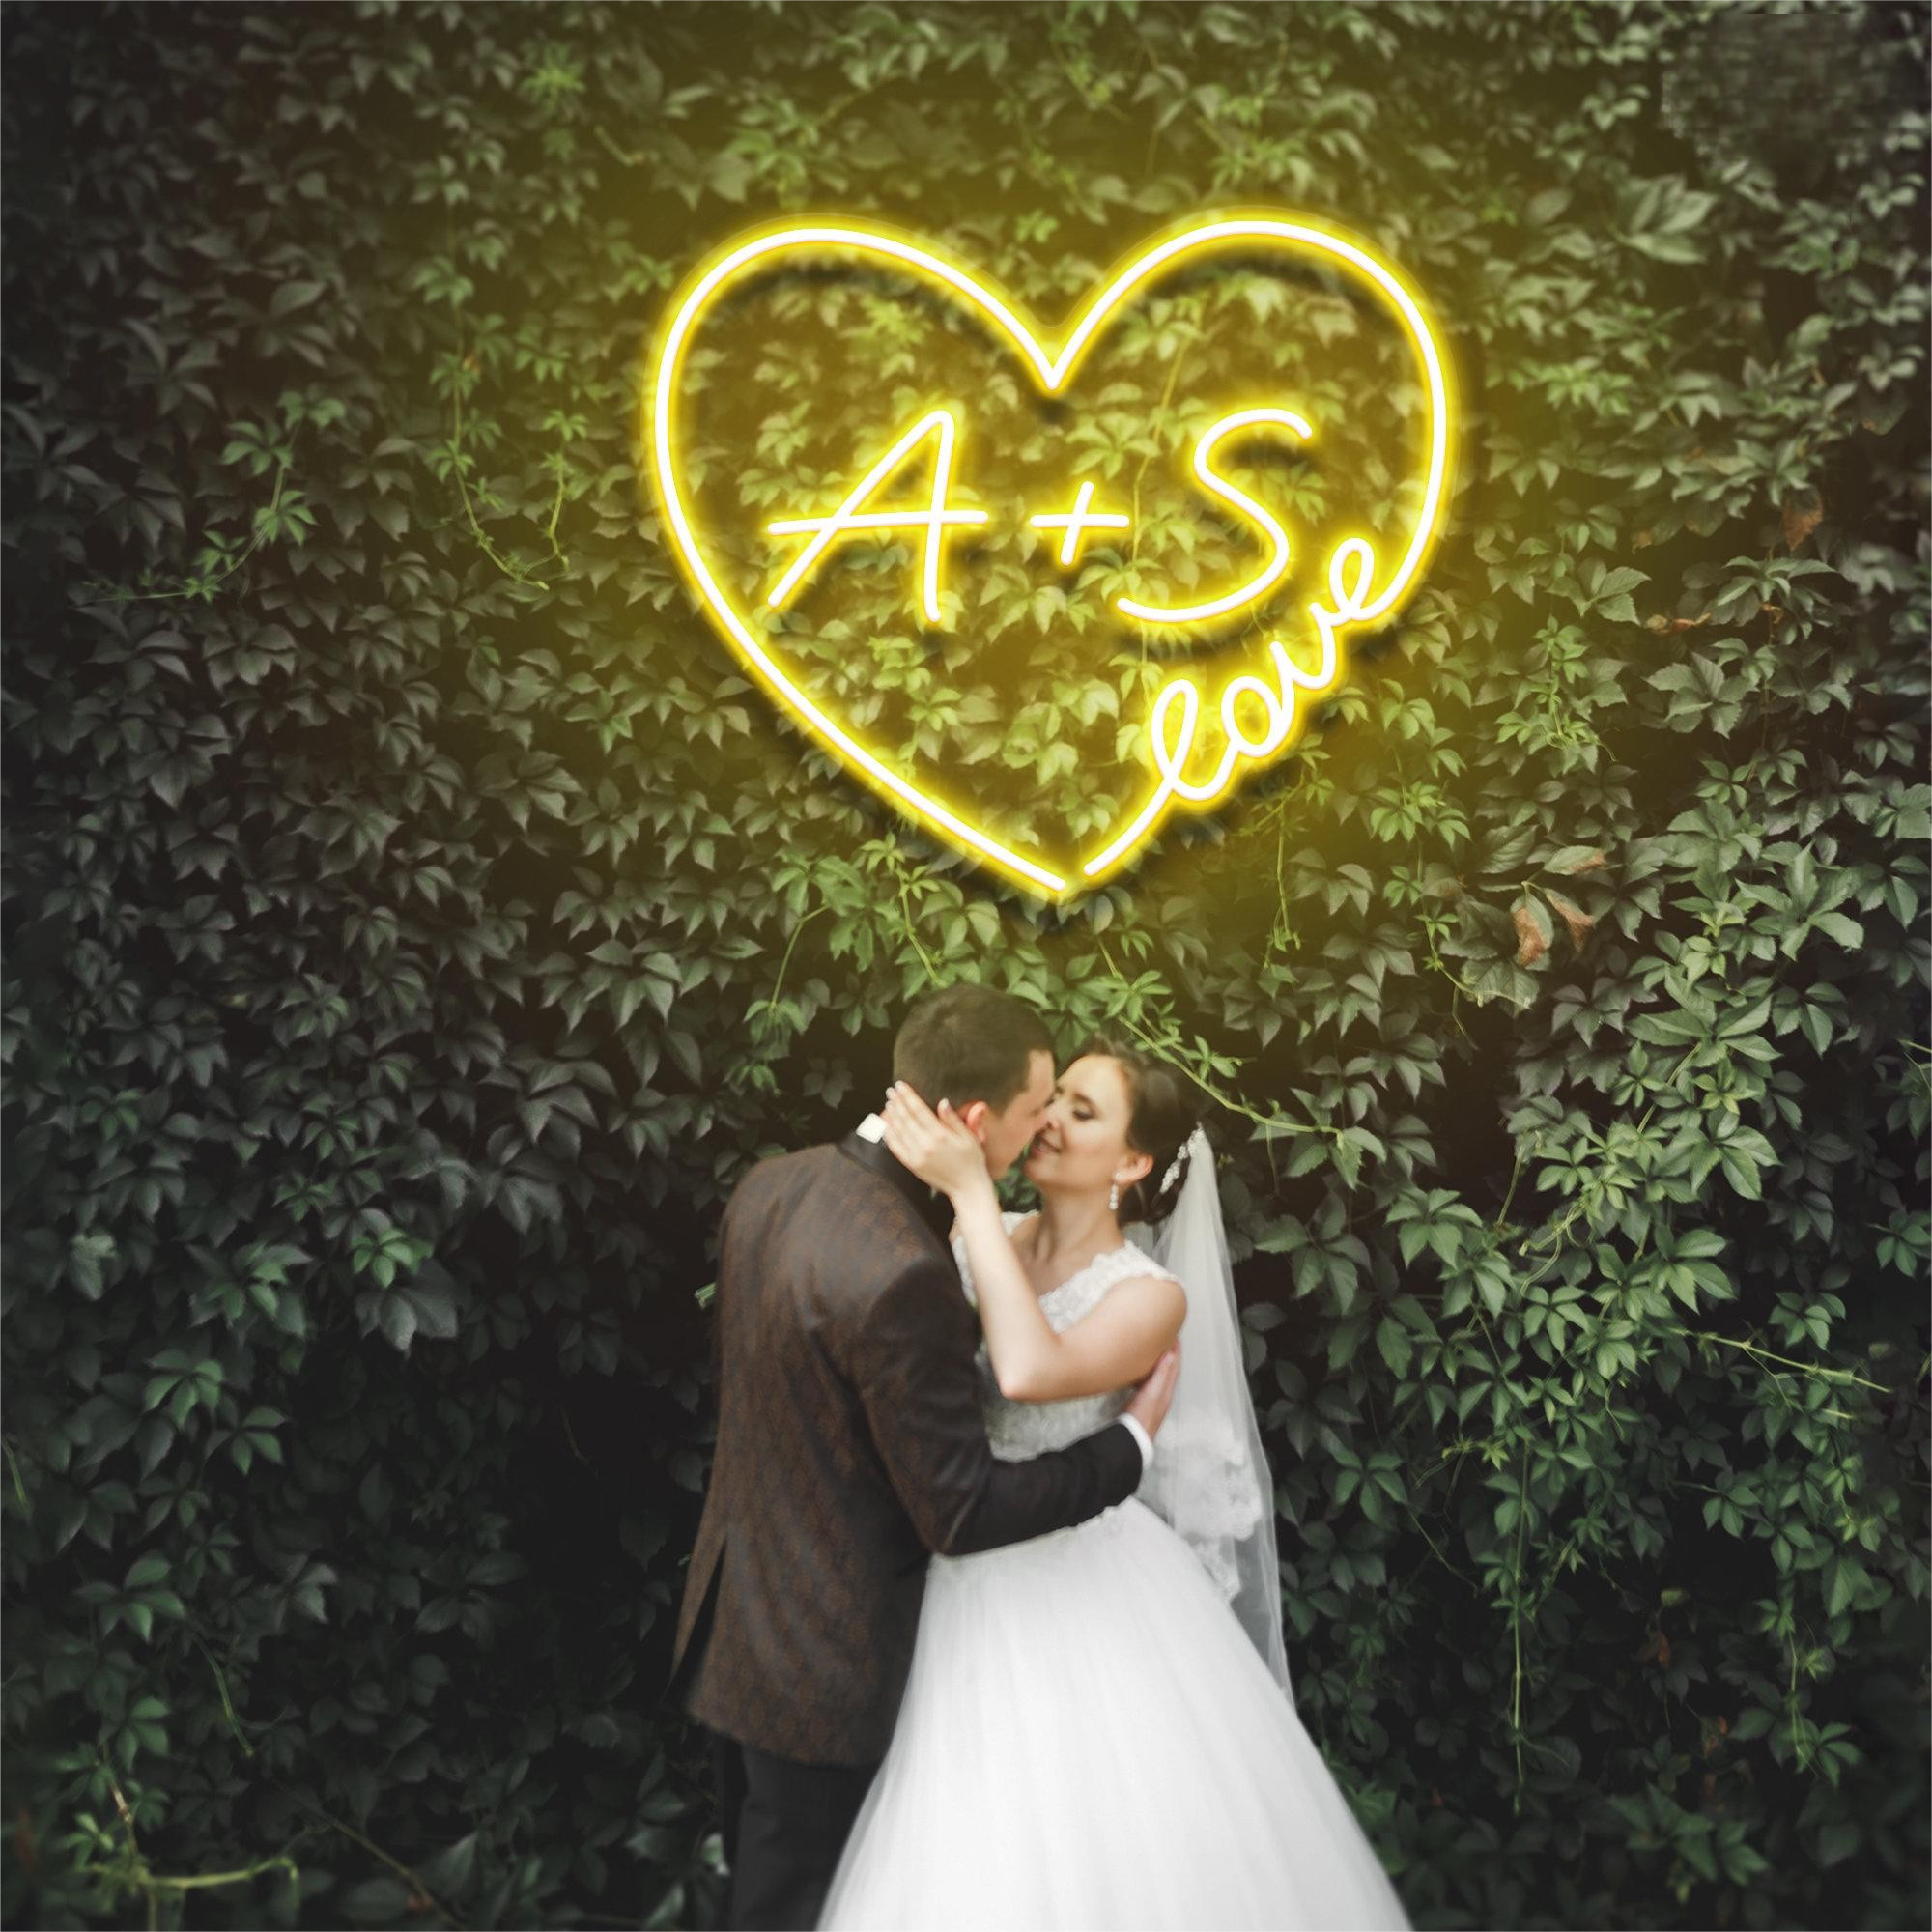 NEONIP-Personalized 100% Handmade Wedding LED Neon Sign with Love Heart and Your Initial Letters